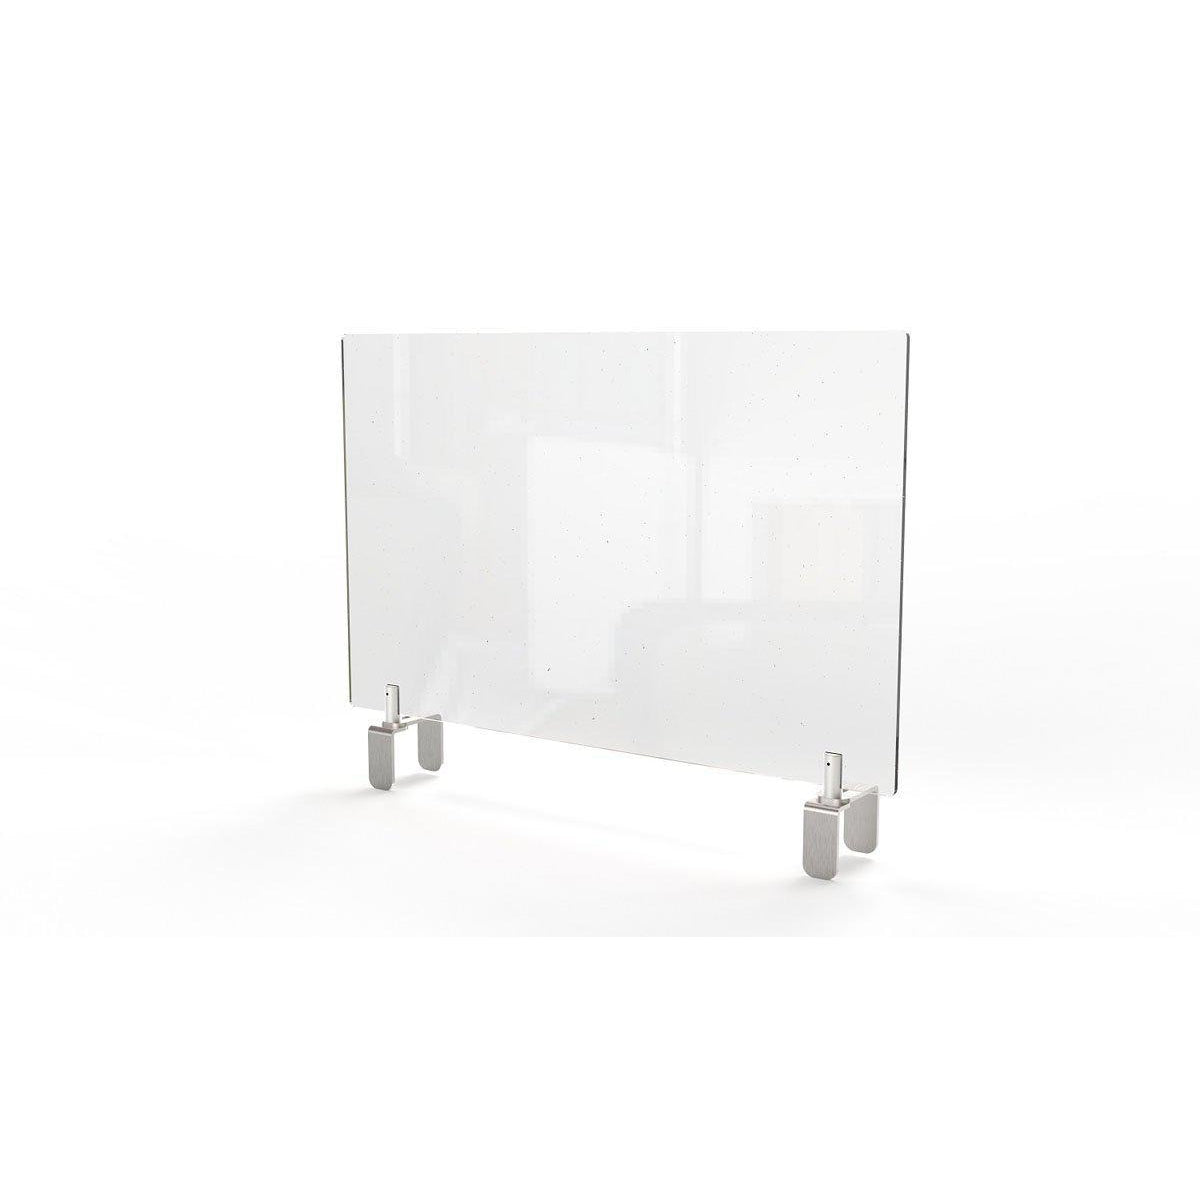 Clear Thermoplastic Partition & Cubicle Extender with Adjustable Clamp Attachment, 18"H x 36"W